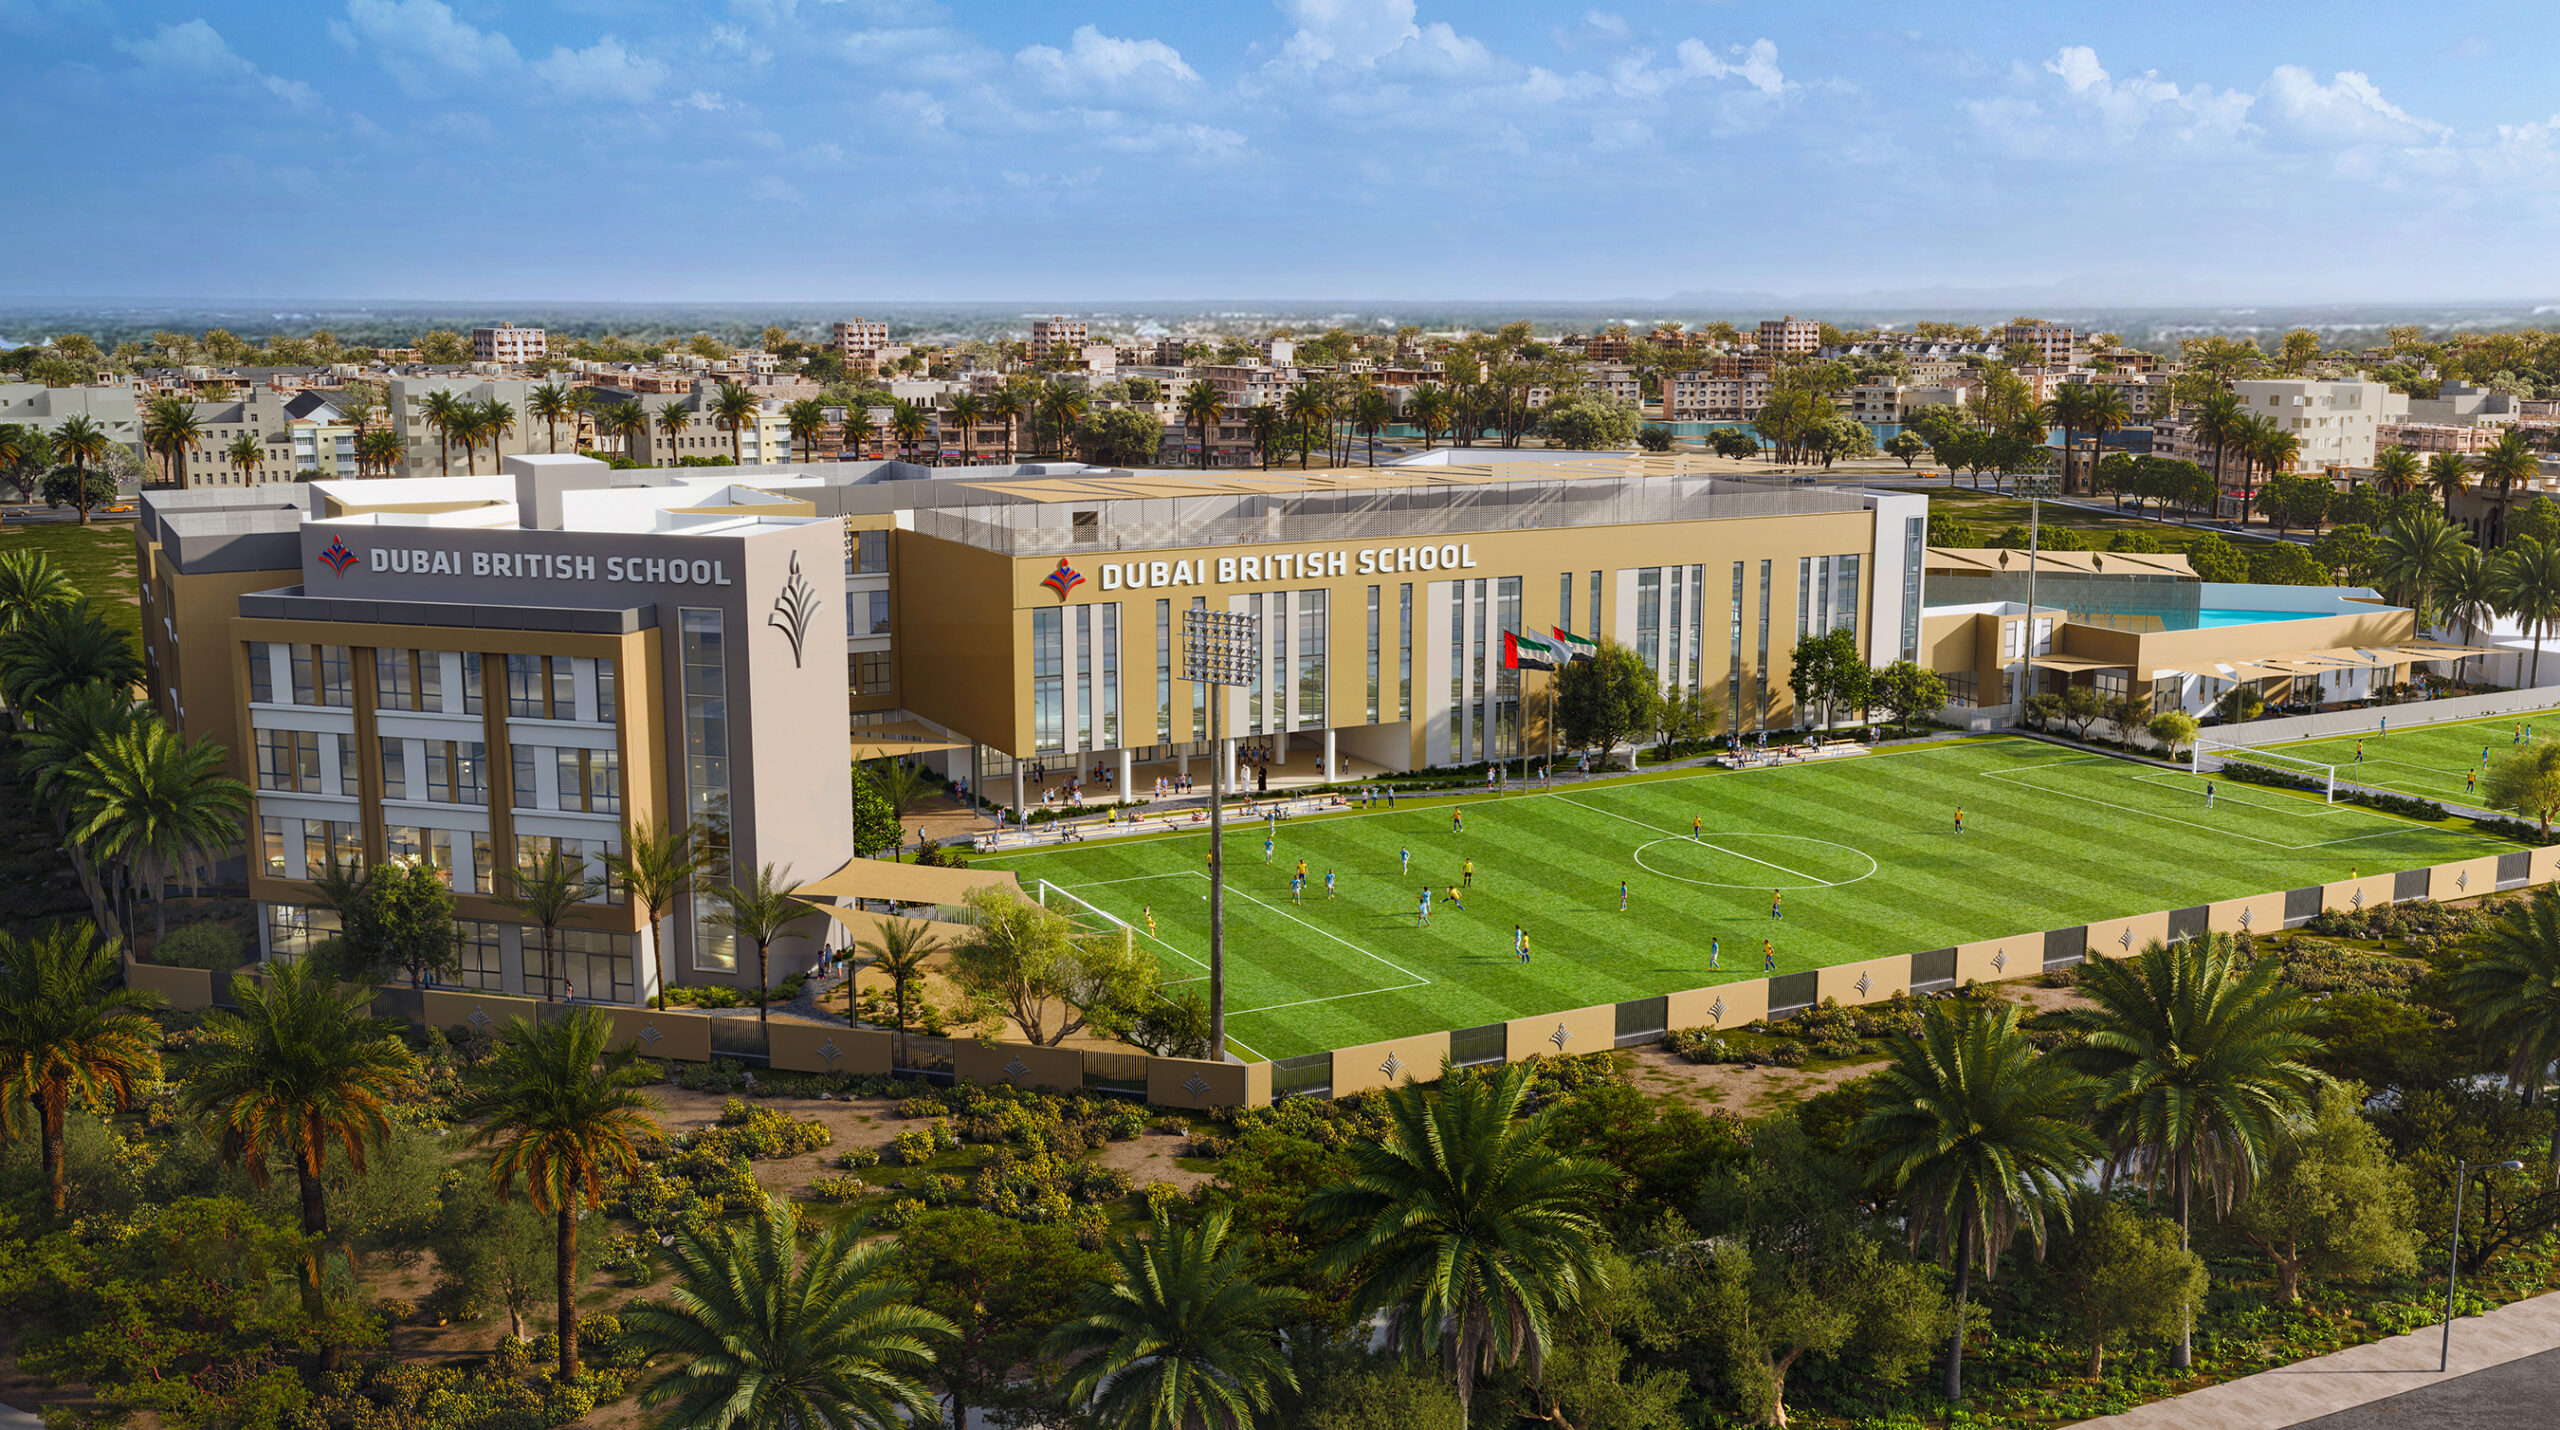 Outstanding sporting facilities and playing fields are one of the many stand-out features of the planned DBS Mira. Dubai British School Mira School review by SchoolsCompared.com